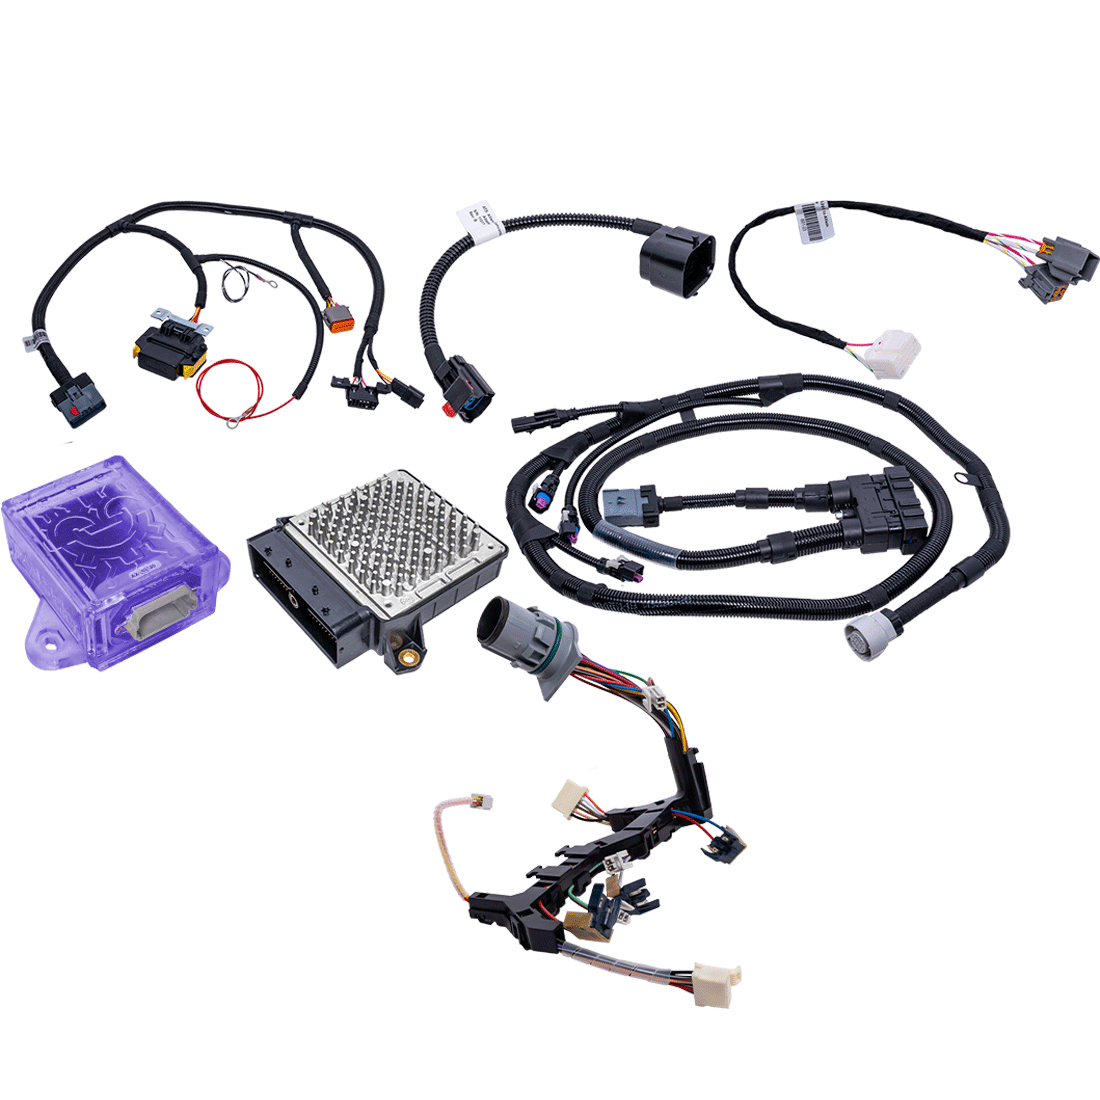 ATS 3190522326 Electronics Upgrade Kit Allison Conversion 68RFE 2007.5-2009 2006-2010 6 Speed Allison Used in Conversion